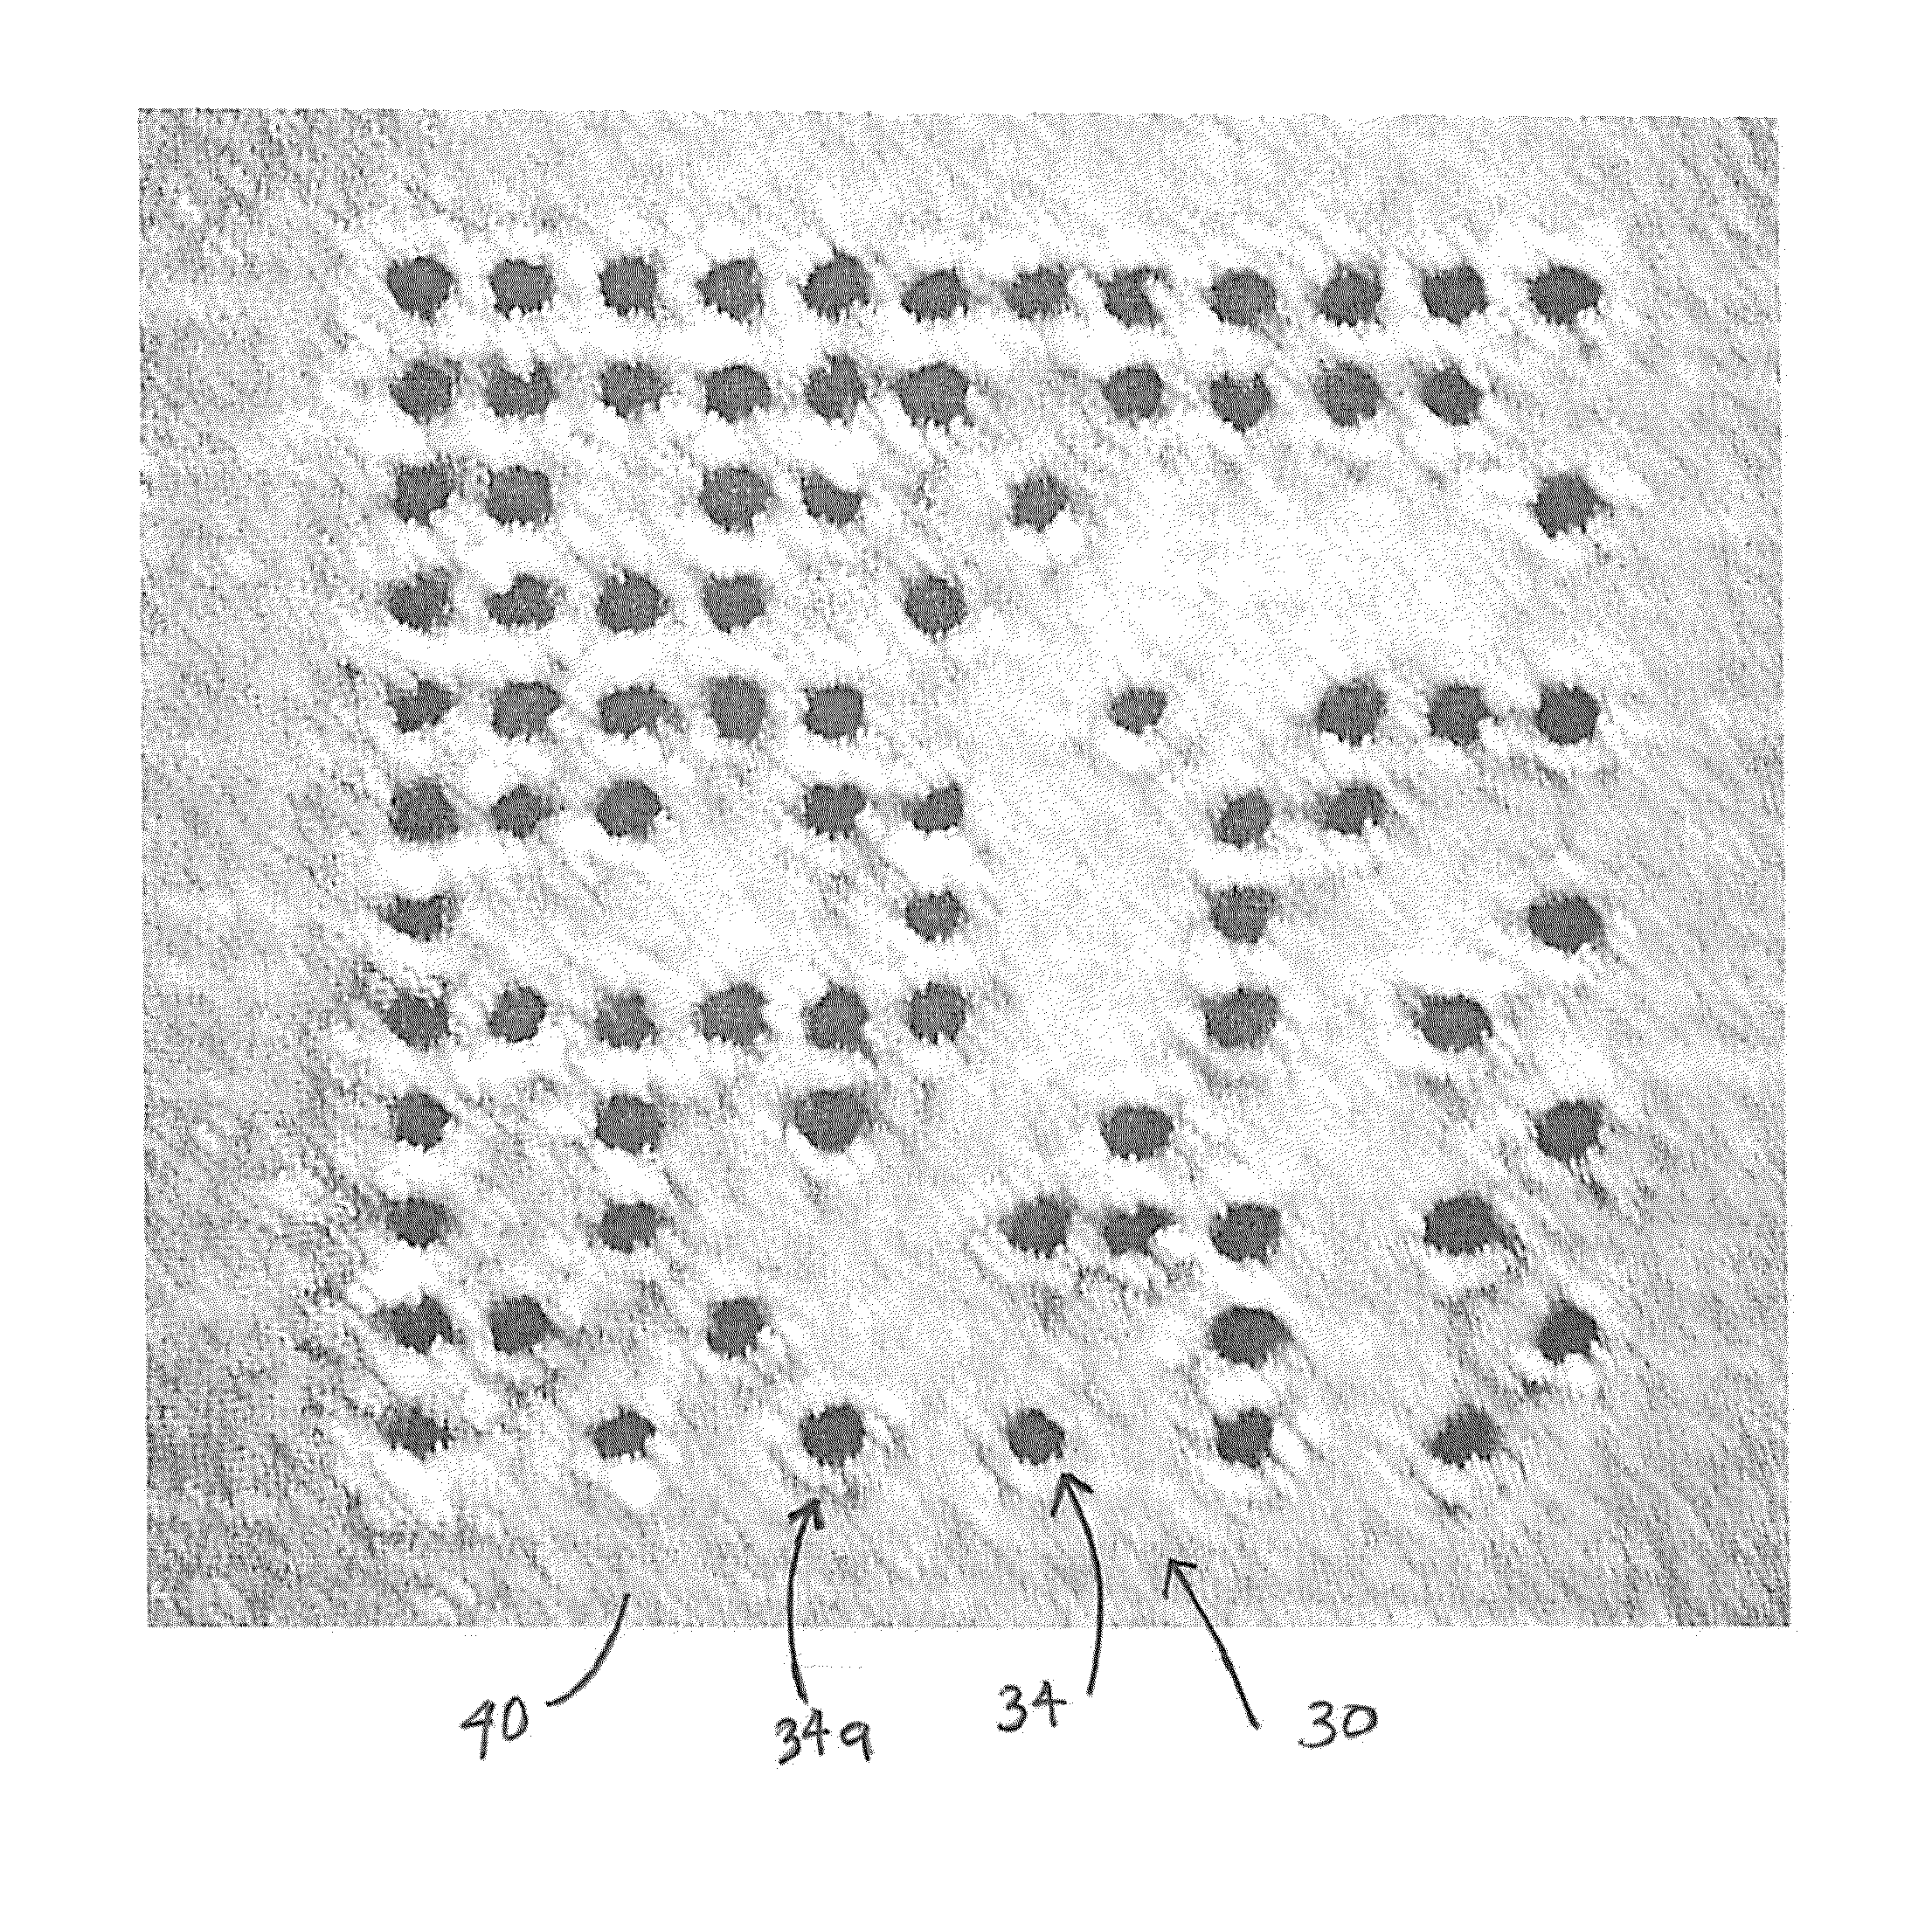 Coded articles and systems and methods of identification of the same